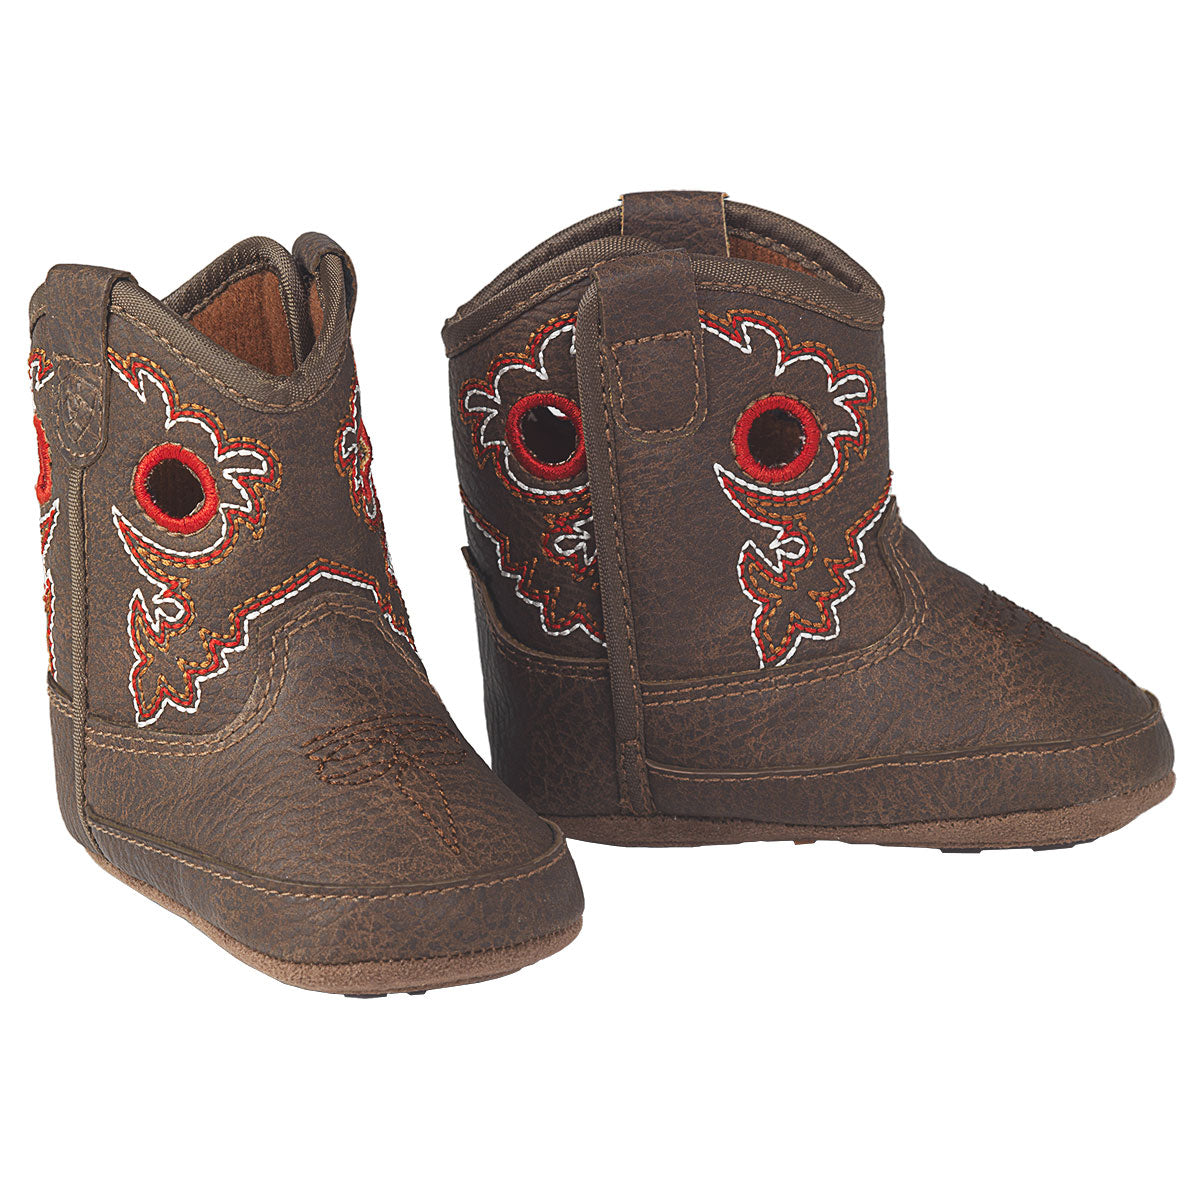 Ariat Lil' Stompers Rough Stock Infant Boots